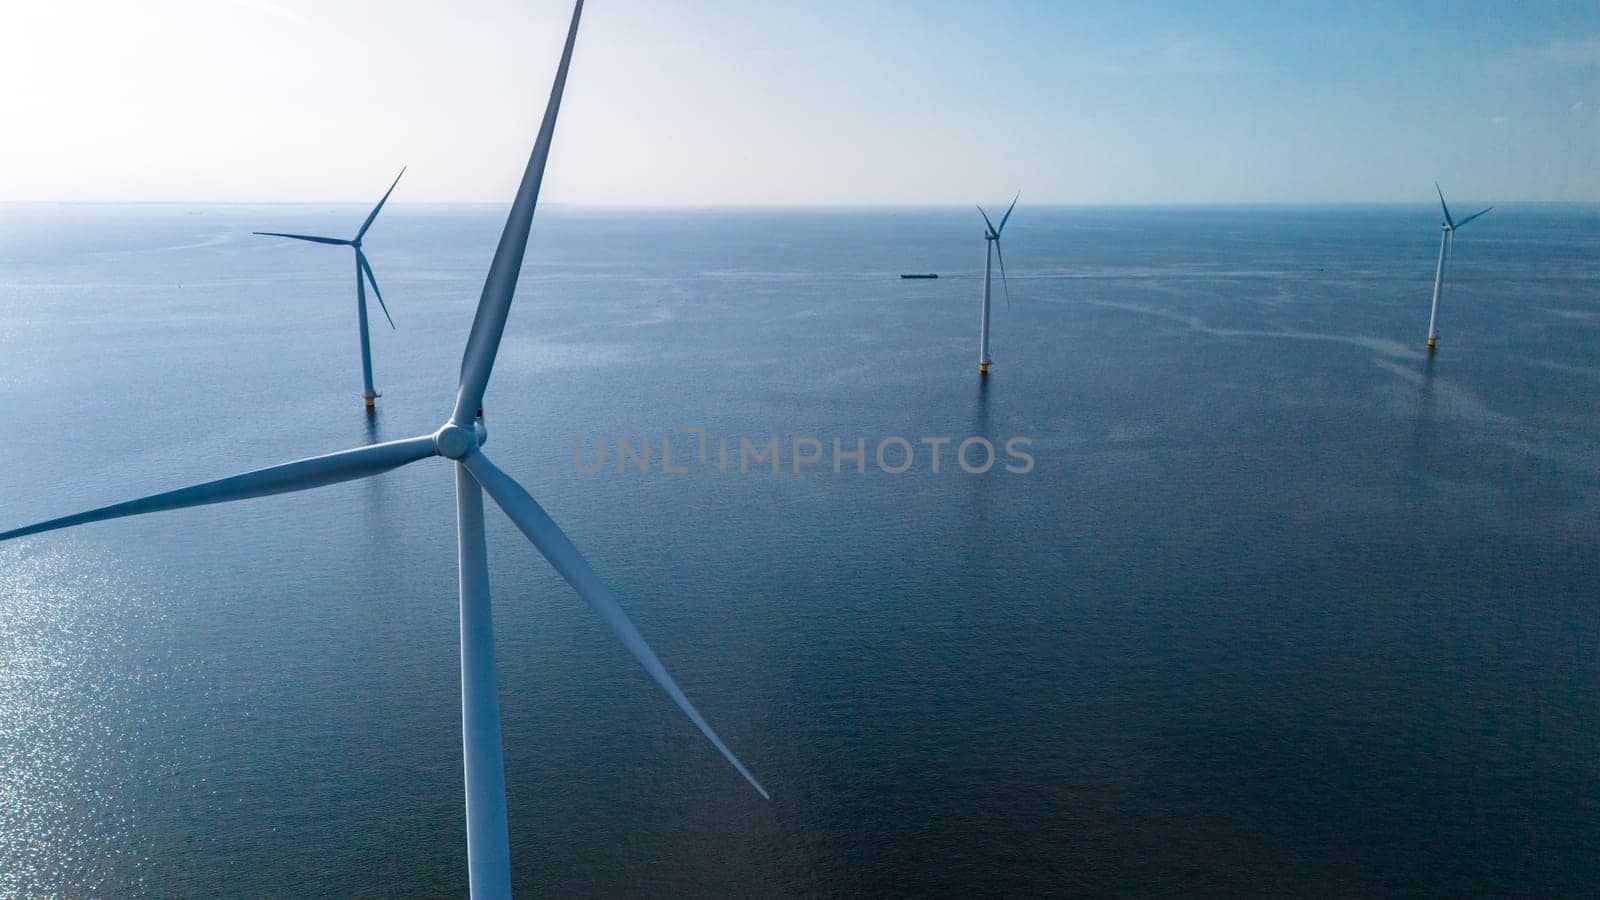 A group of majestic wind turbines stand tall in the ocean, their blades gracefully turning in the wind to generate clean, renewable energy by fokkebok